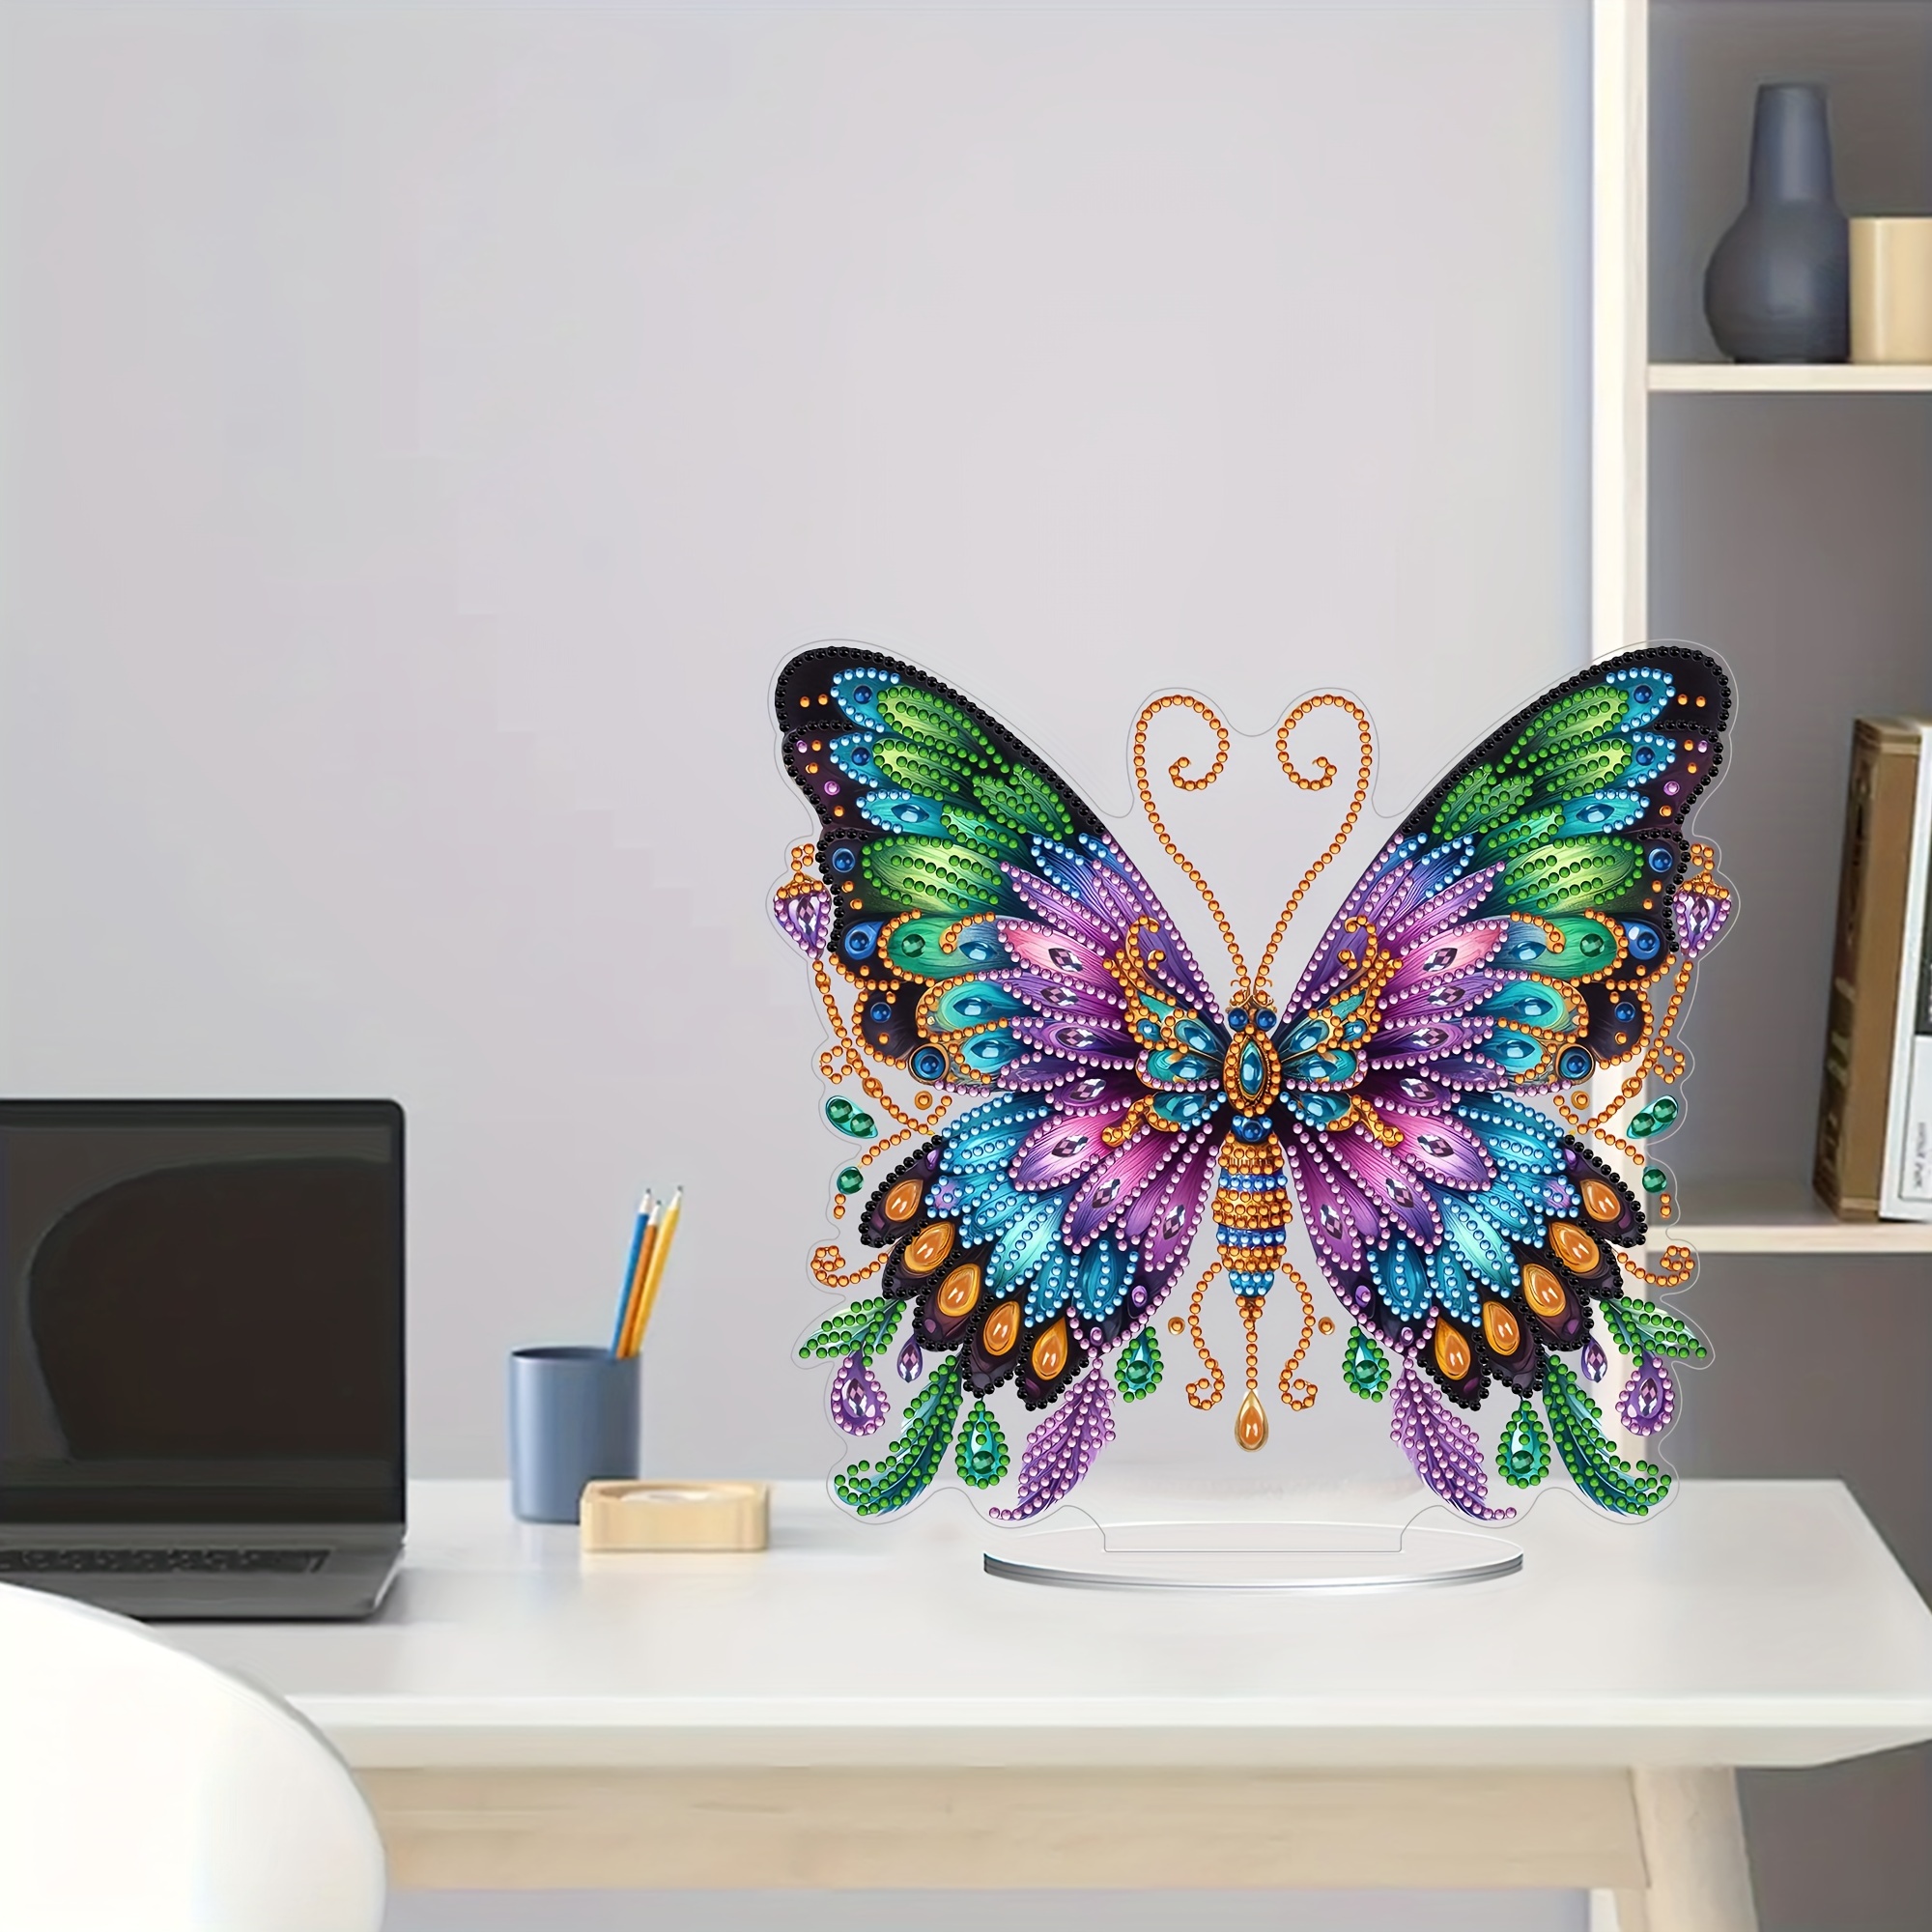 

1pc Diy Acrylic Diamond Art Painting Ornaments, Special Shape Diamond Art Marseille Products Delicate Flower Butterfly Suitable For Desk Decor Desktop Ornaments, Crafts Kits Home Decoration Gifts